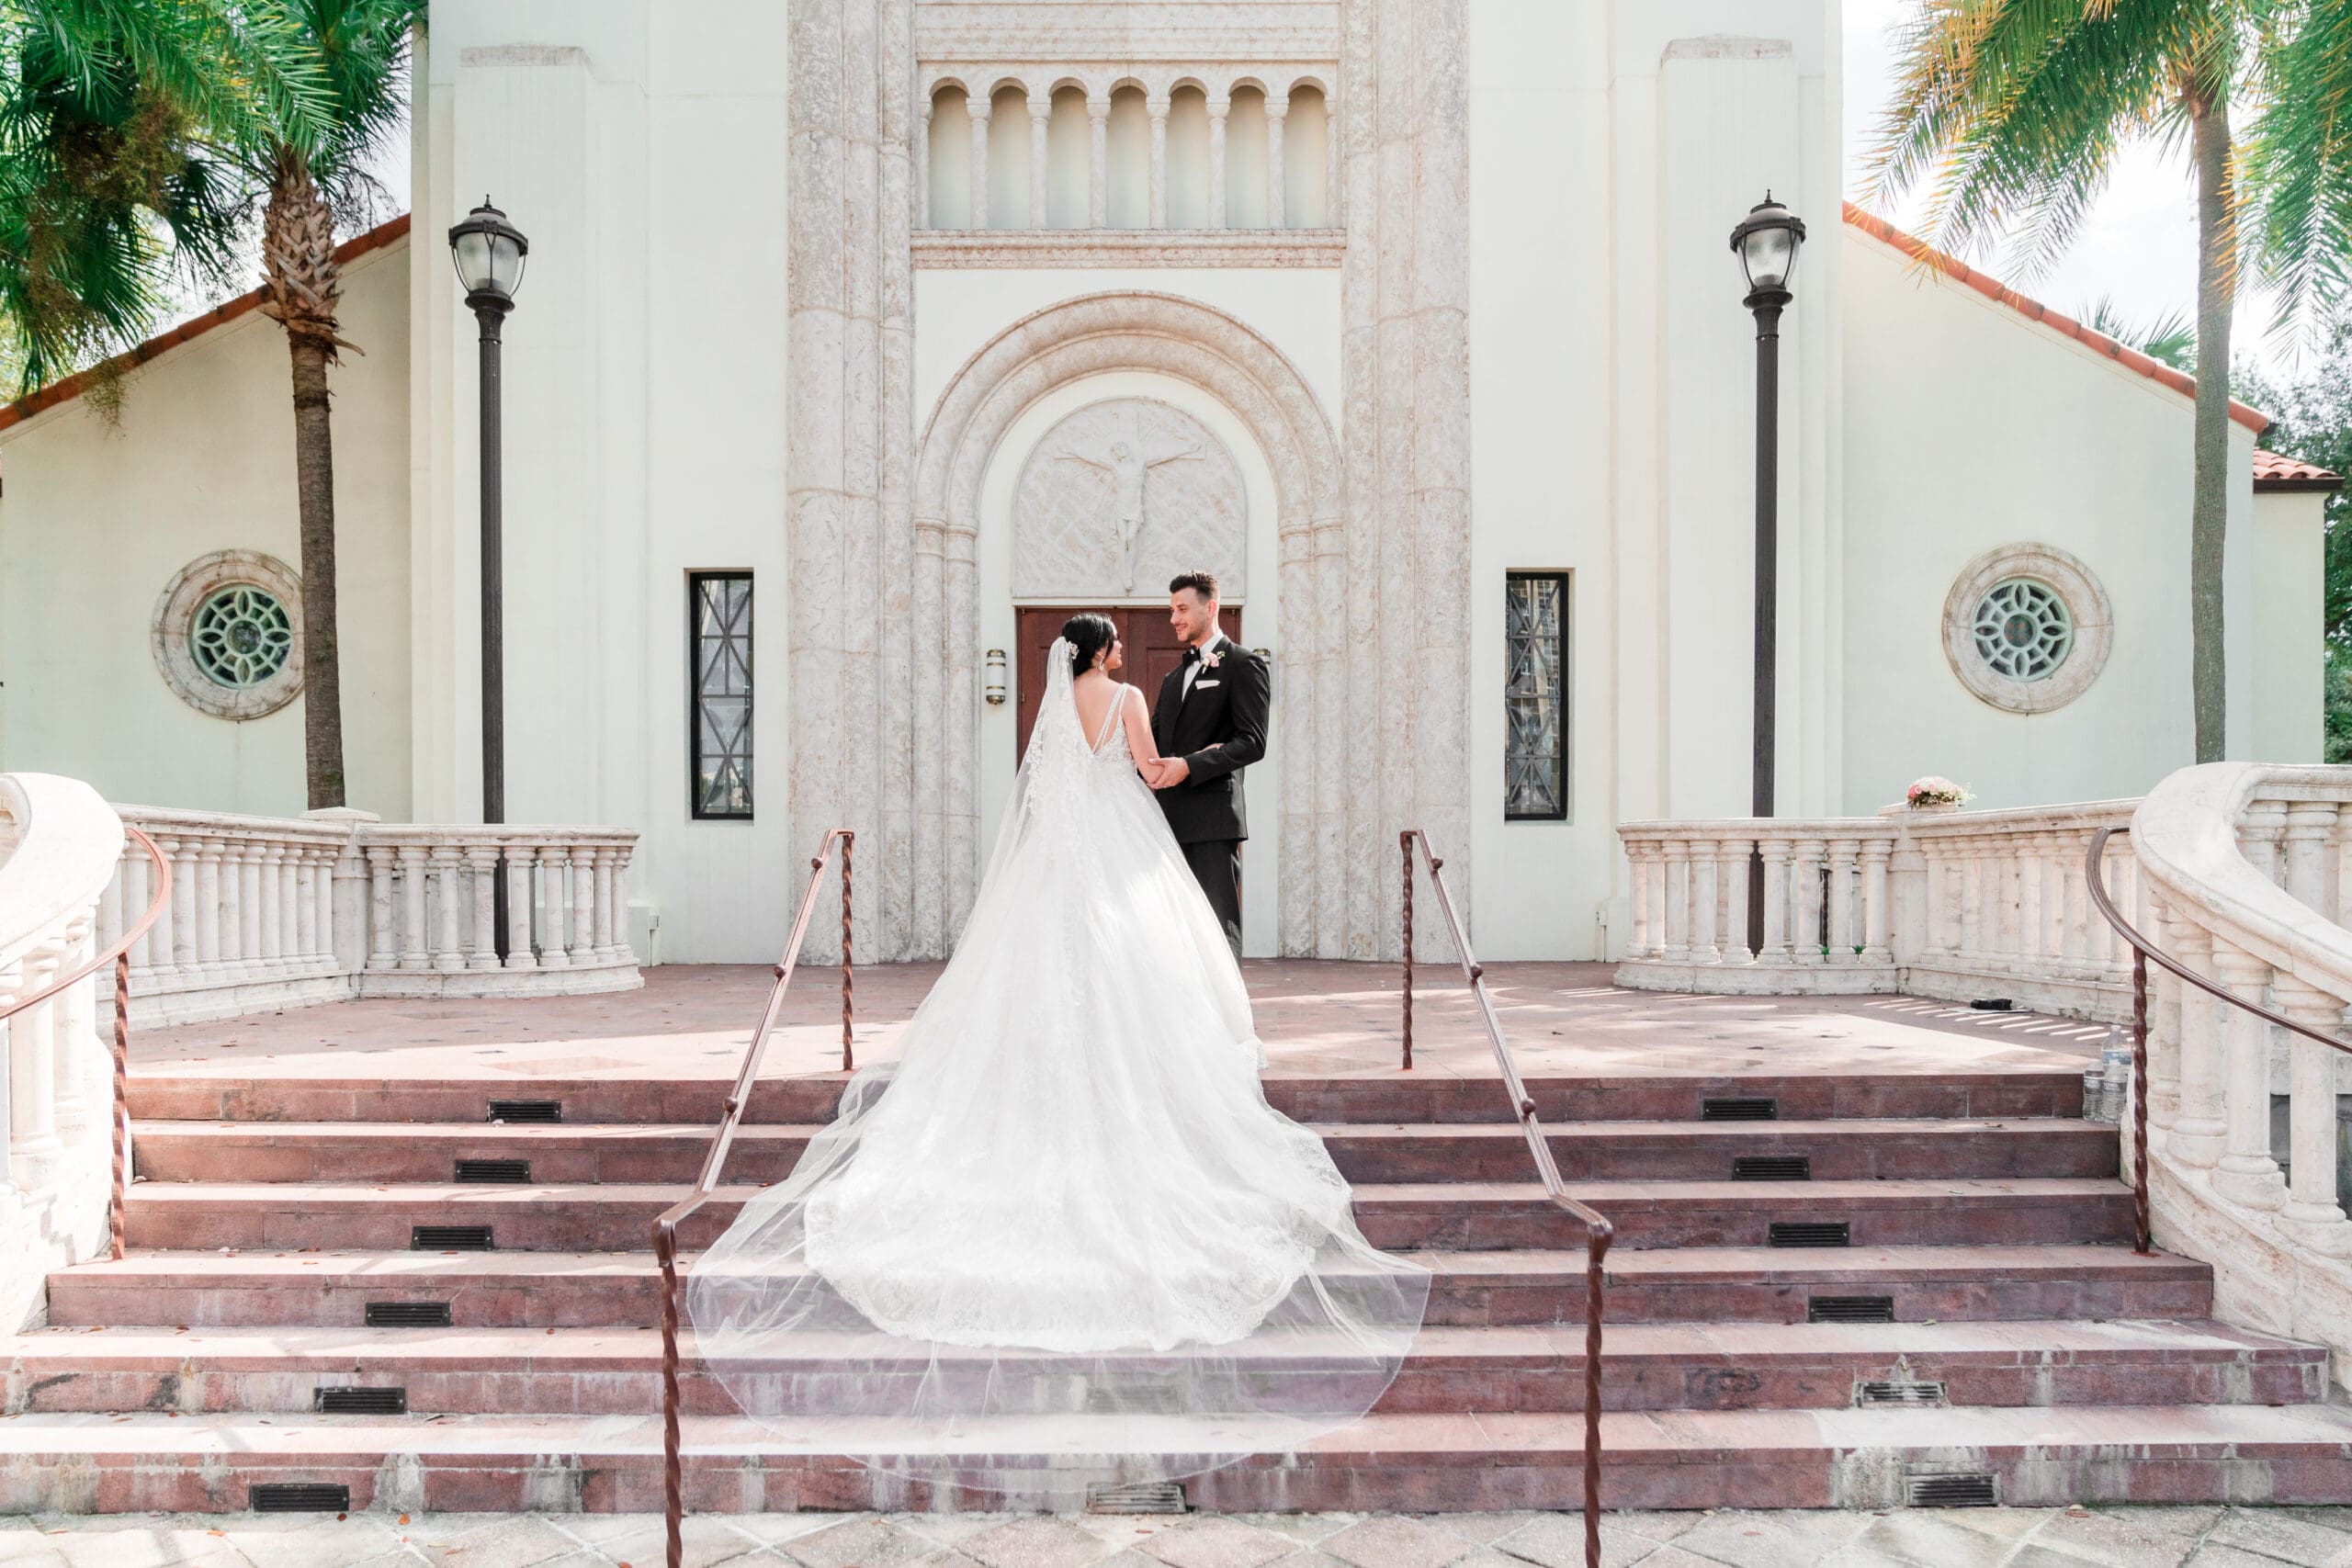 Jessica and Javier embracing arm in arm, gazing into each other's eyes in front of St. James Cathedral.